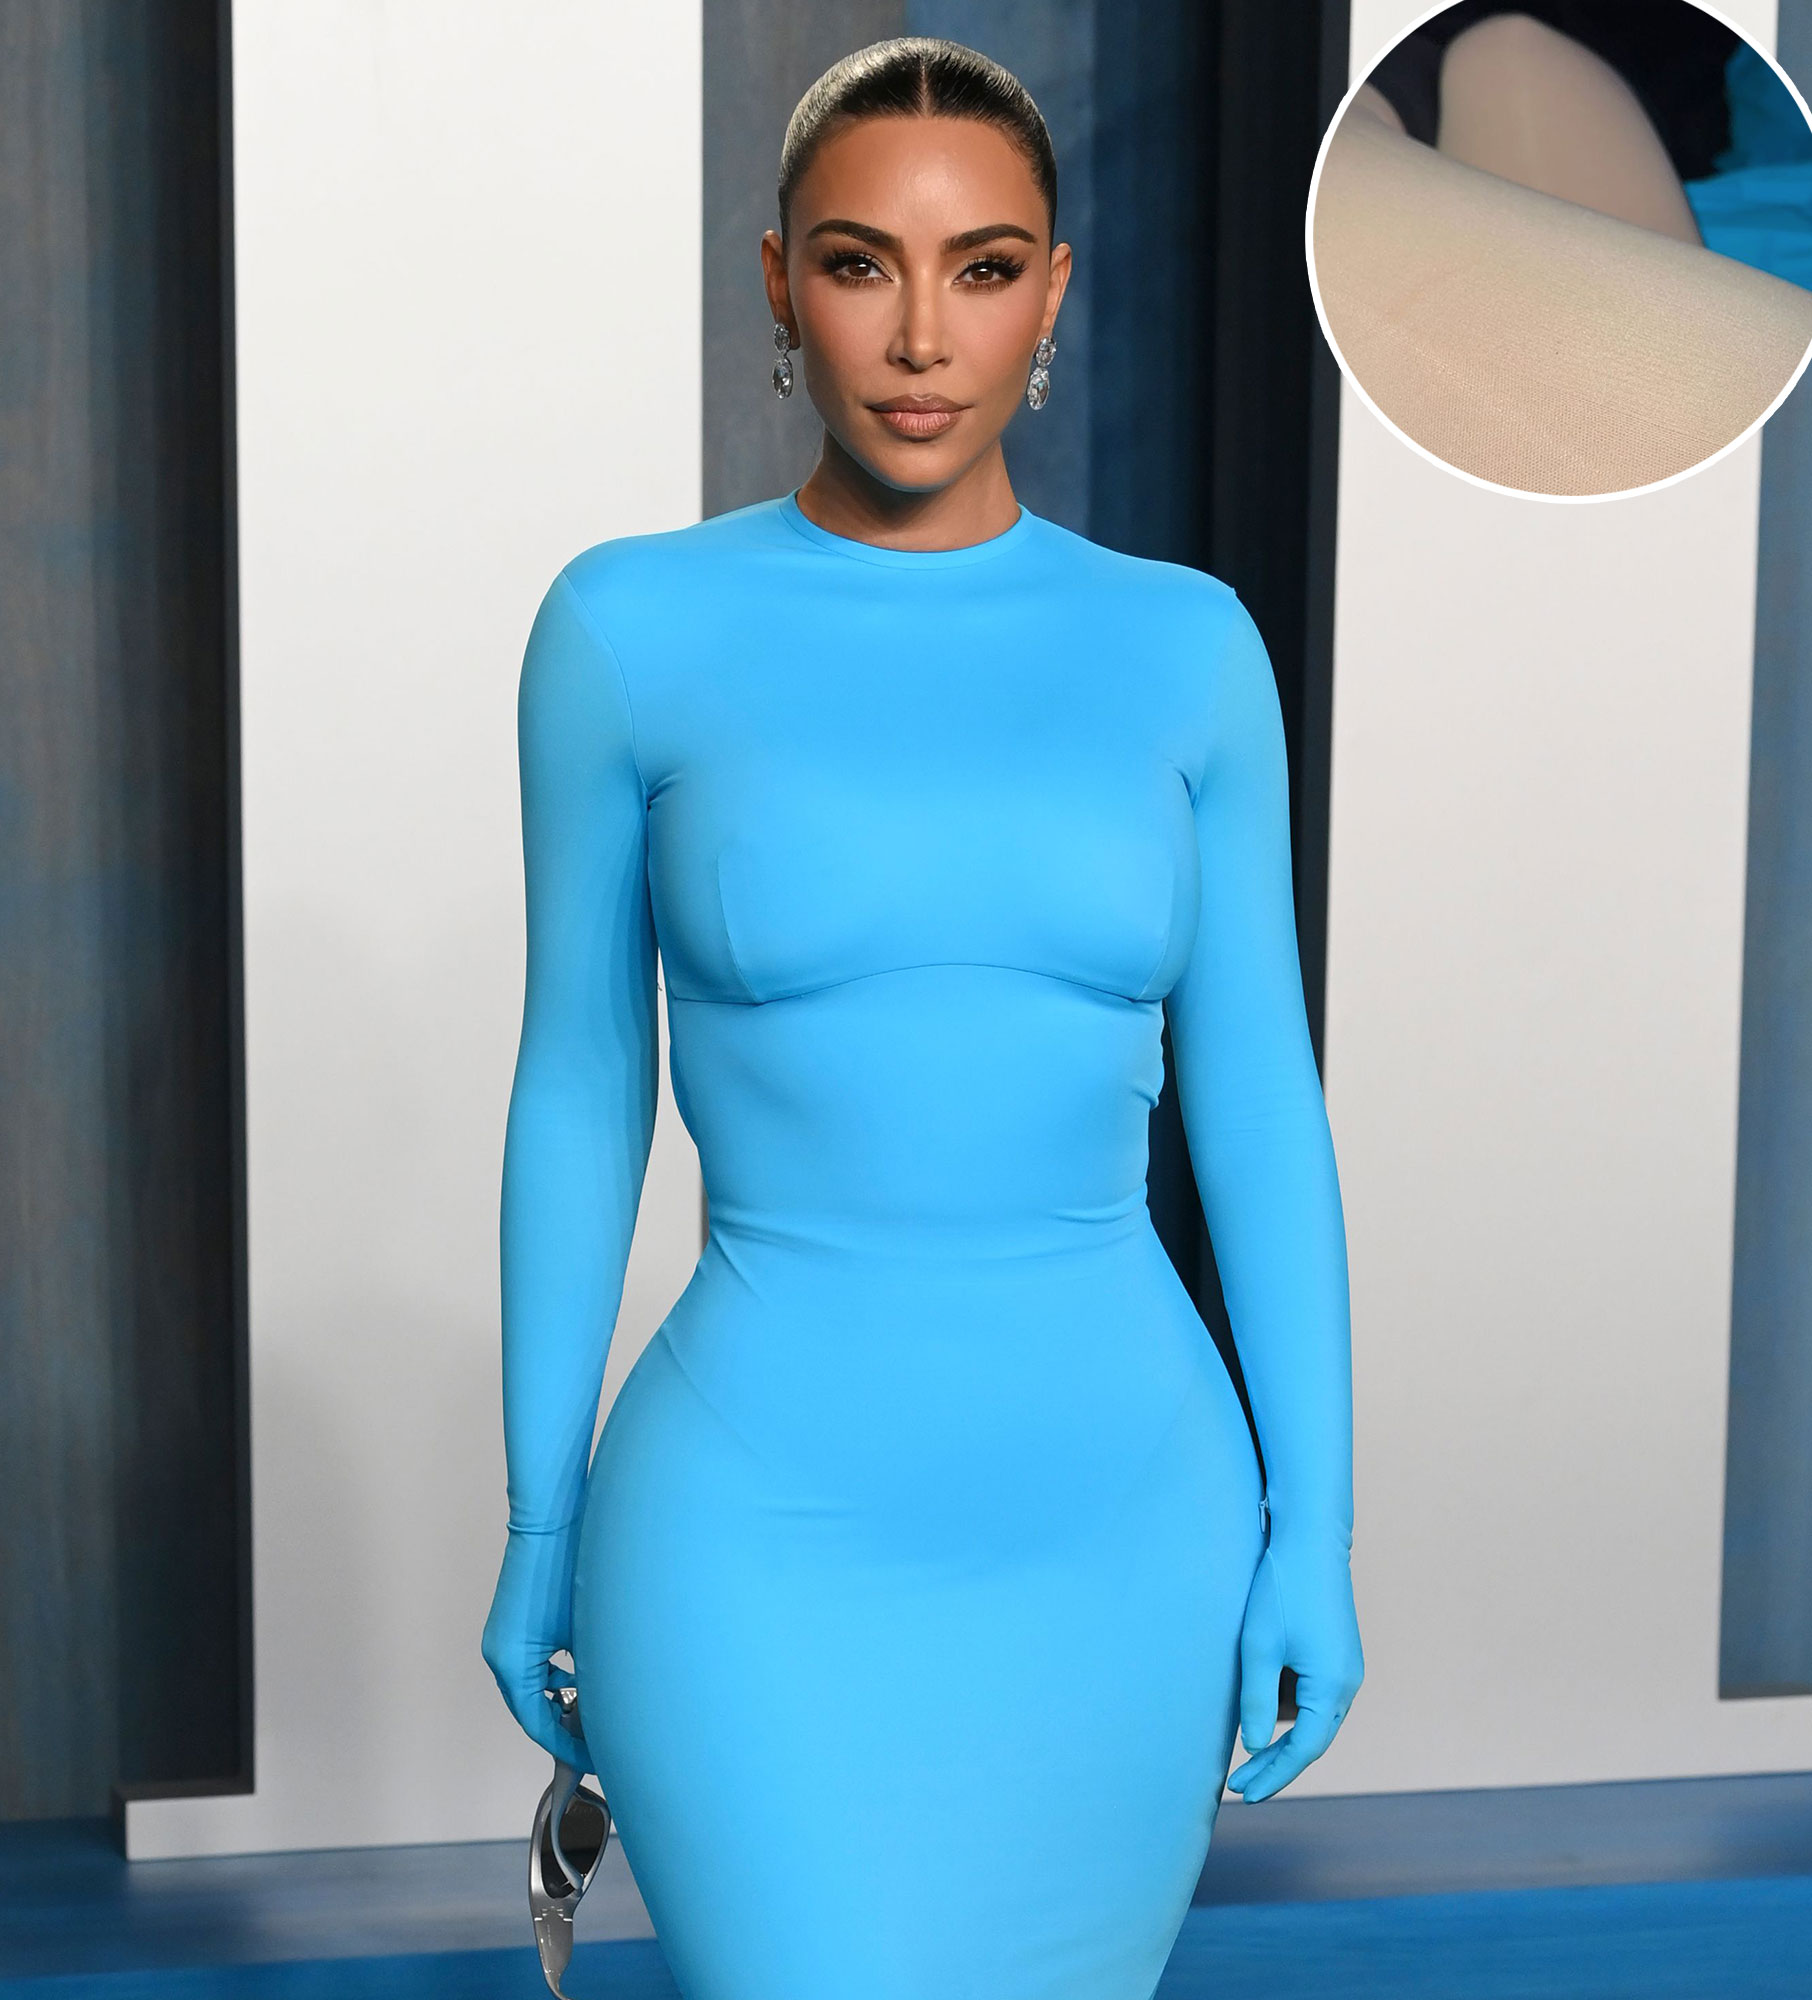 Kim Kardashian shows off her tiny waist and long legs in skintight